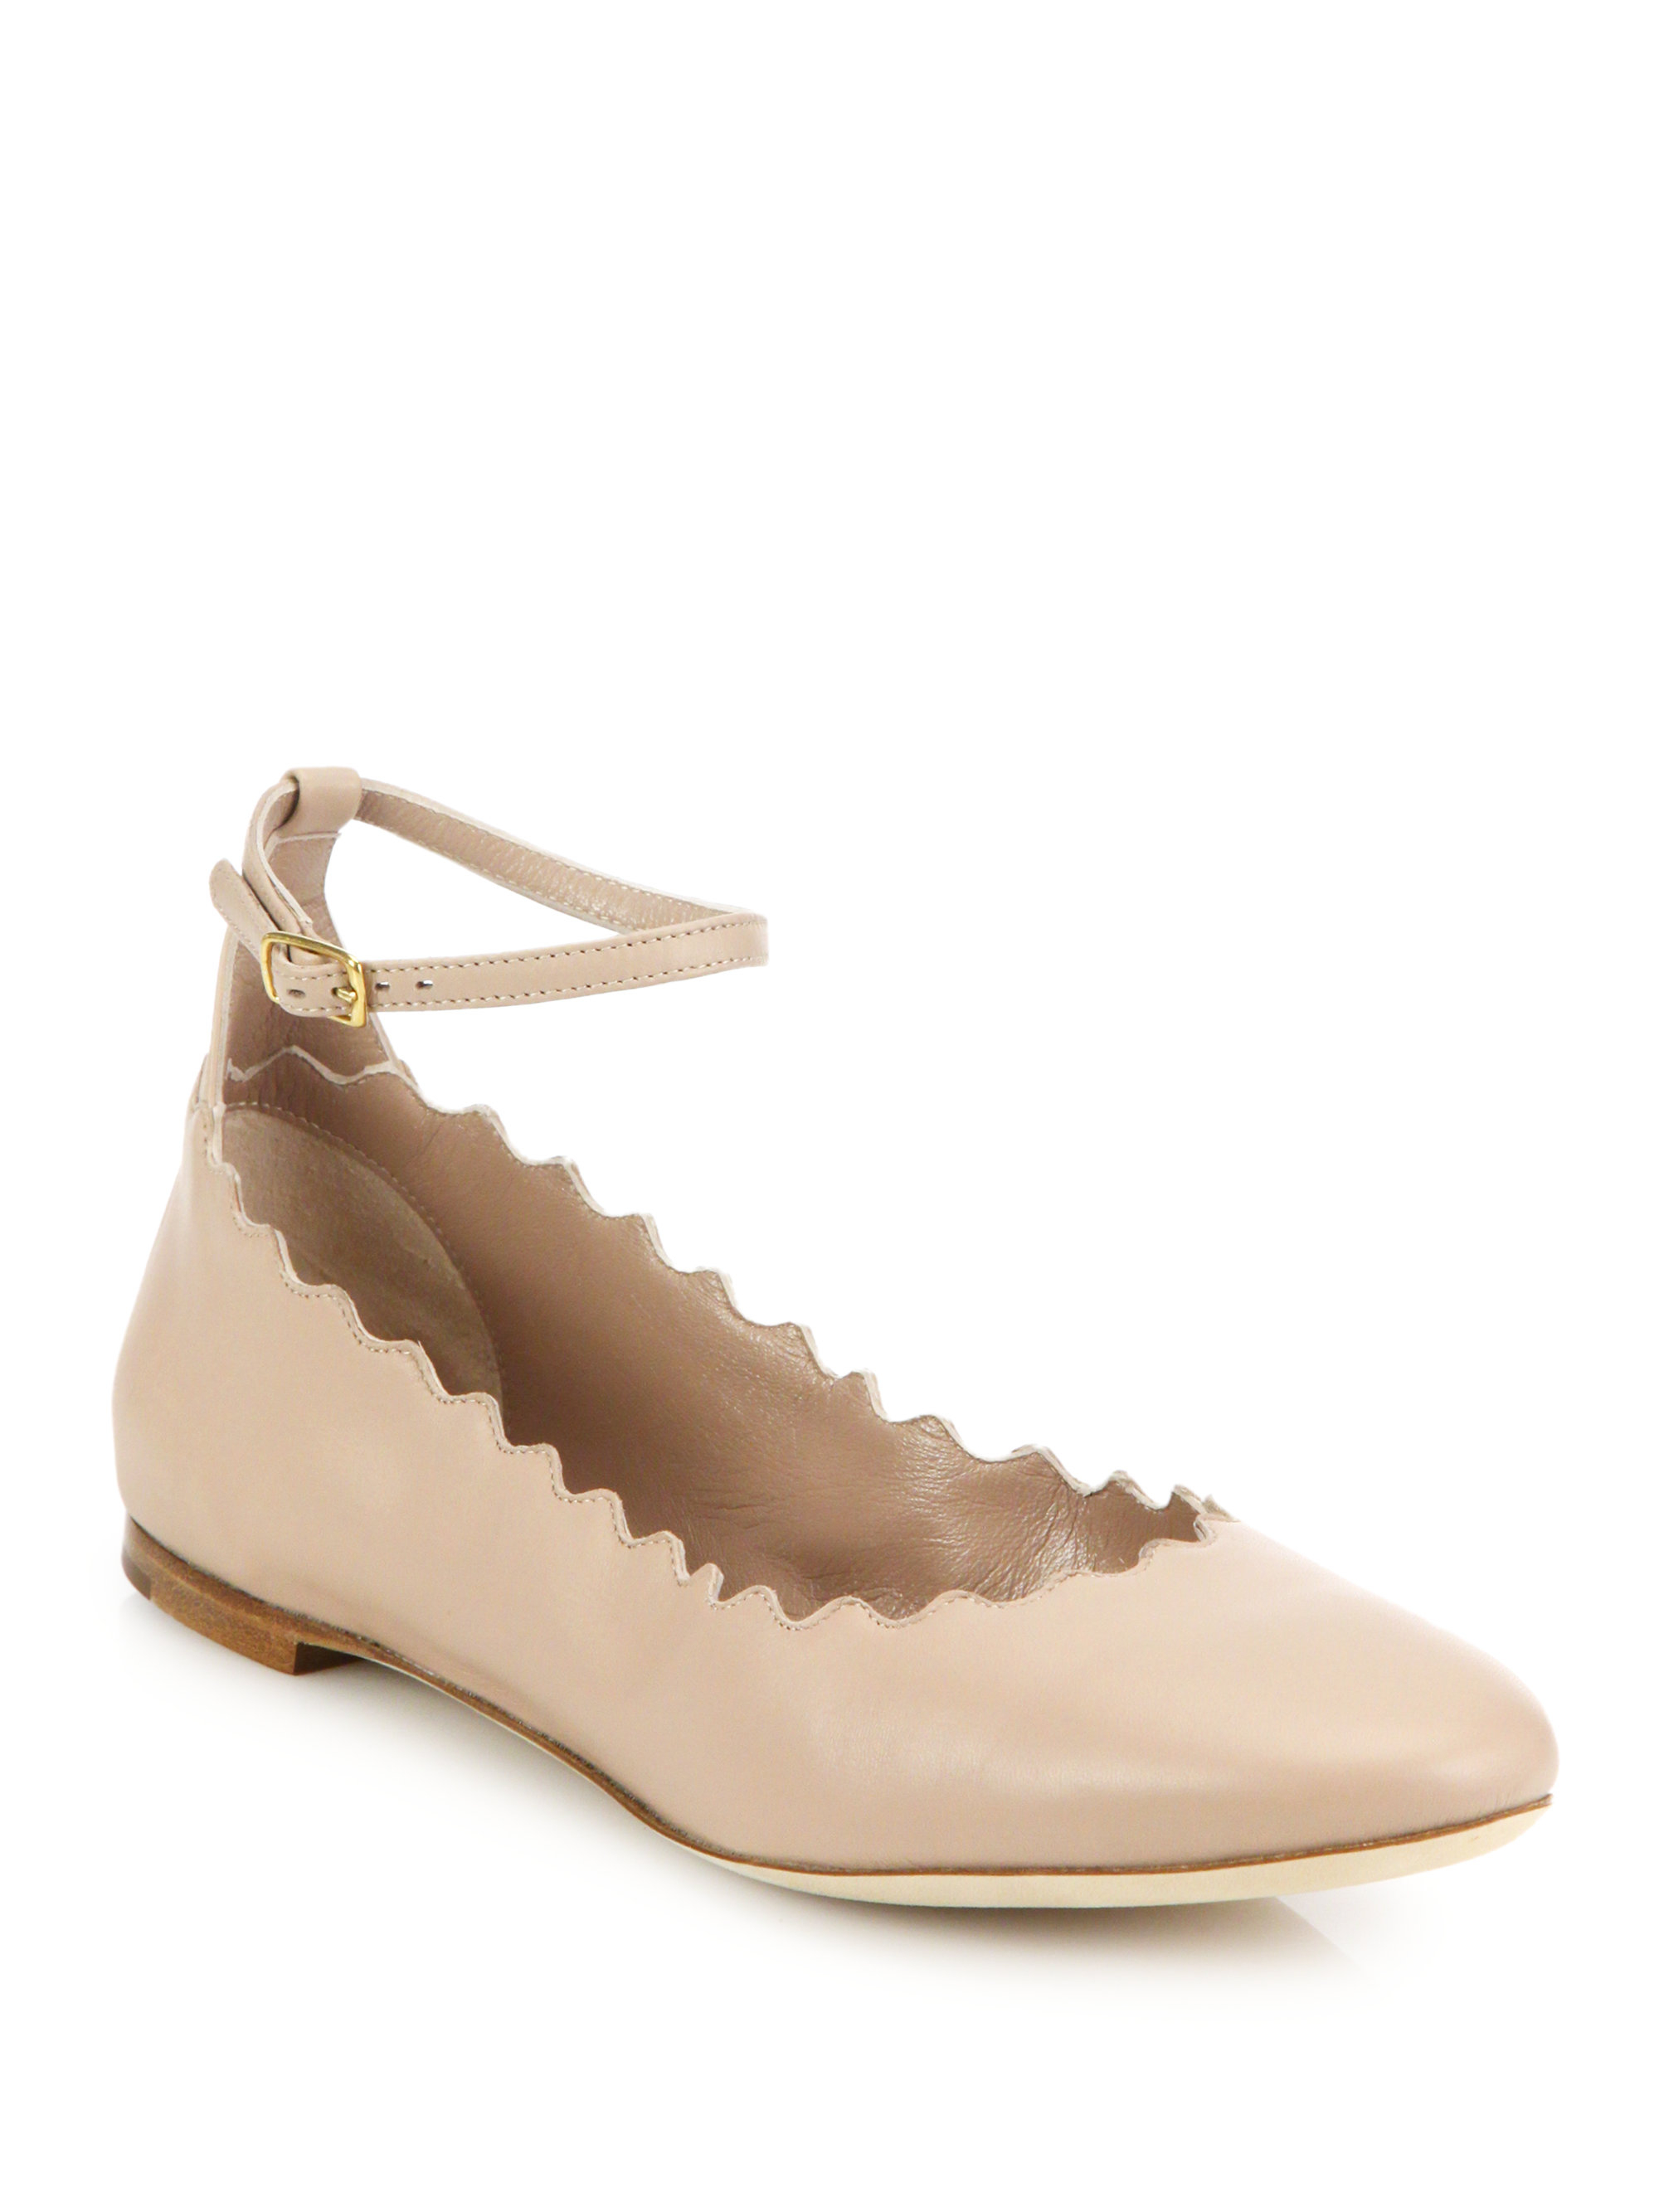 Chloé Scalloped Leather Ankle-strap Flats in Pink - Lyst